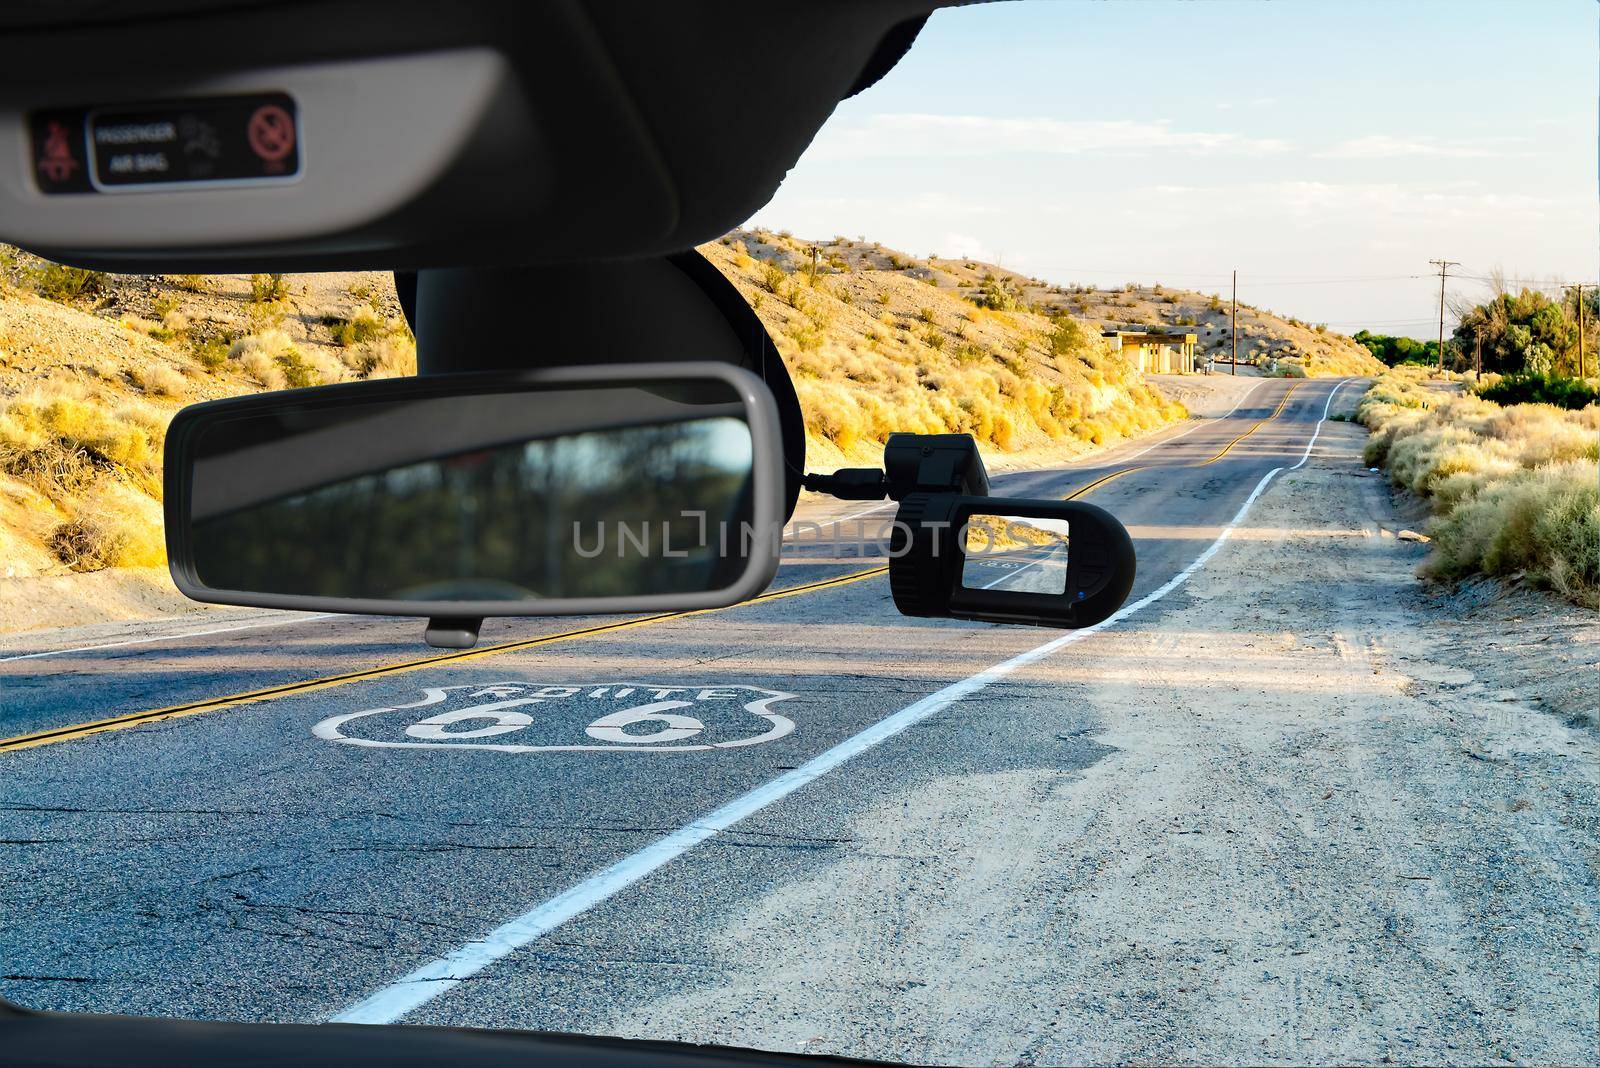 Looking through a dashcam car camera installed on a windshield with view of the Historic Route 66, with pavement sign in California, USA